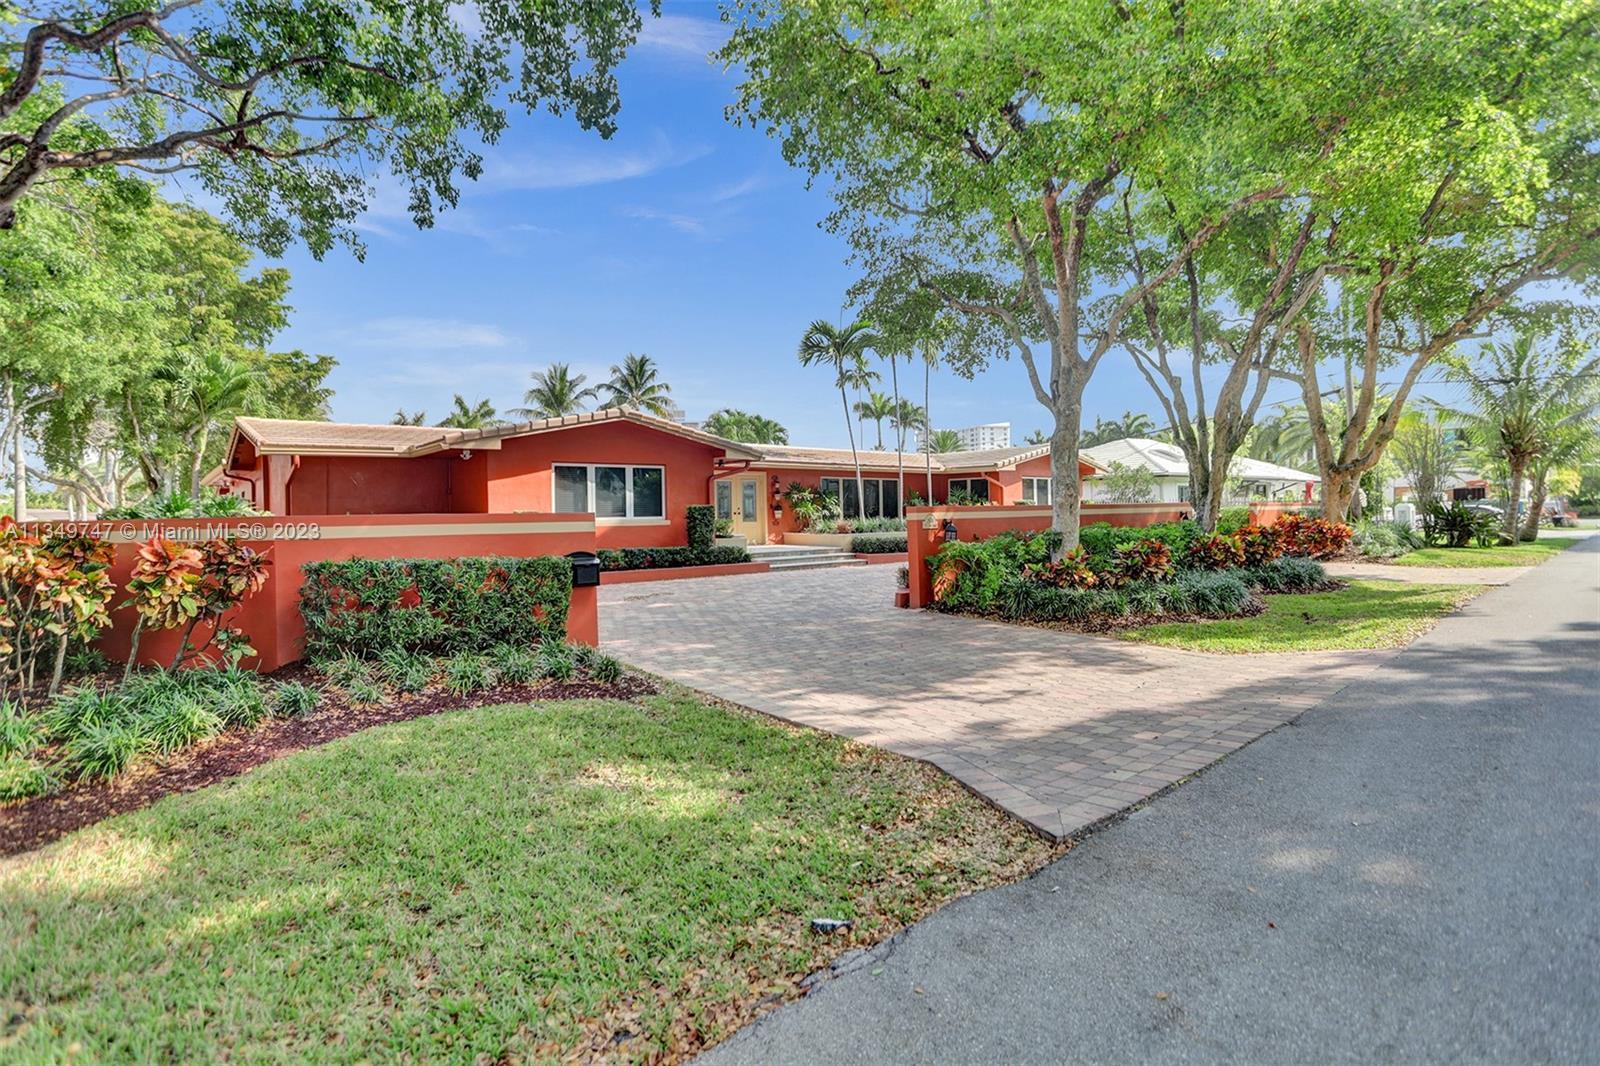 One of the MOST secluded areas of East Fort Lauderdale. This beautiful estate which boasts over 3674